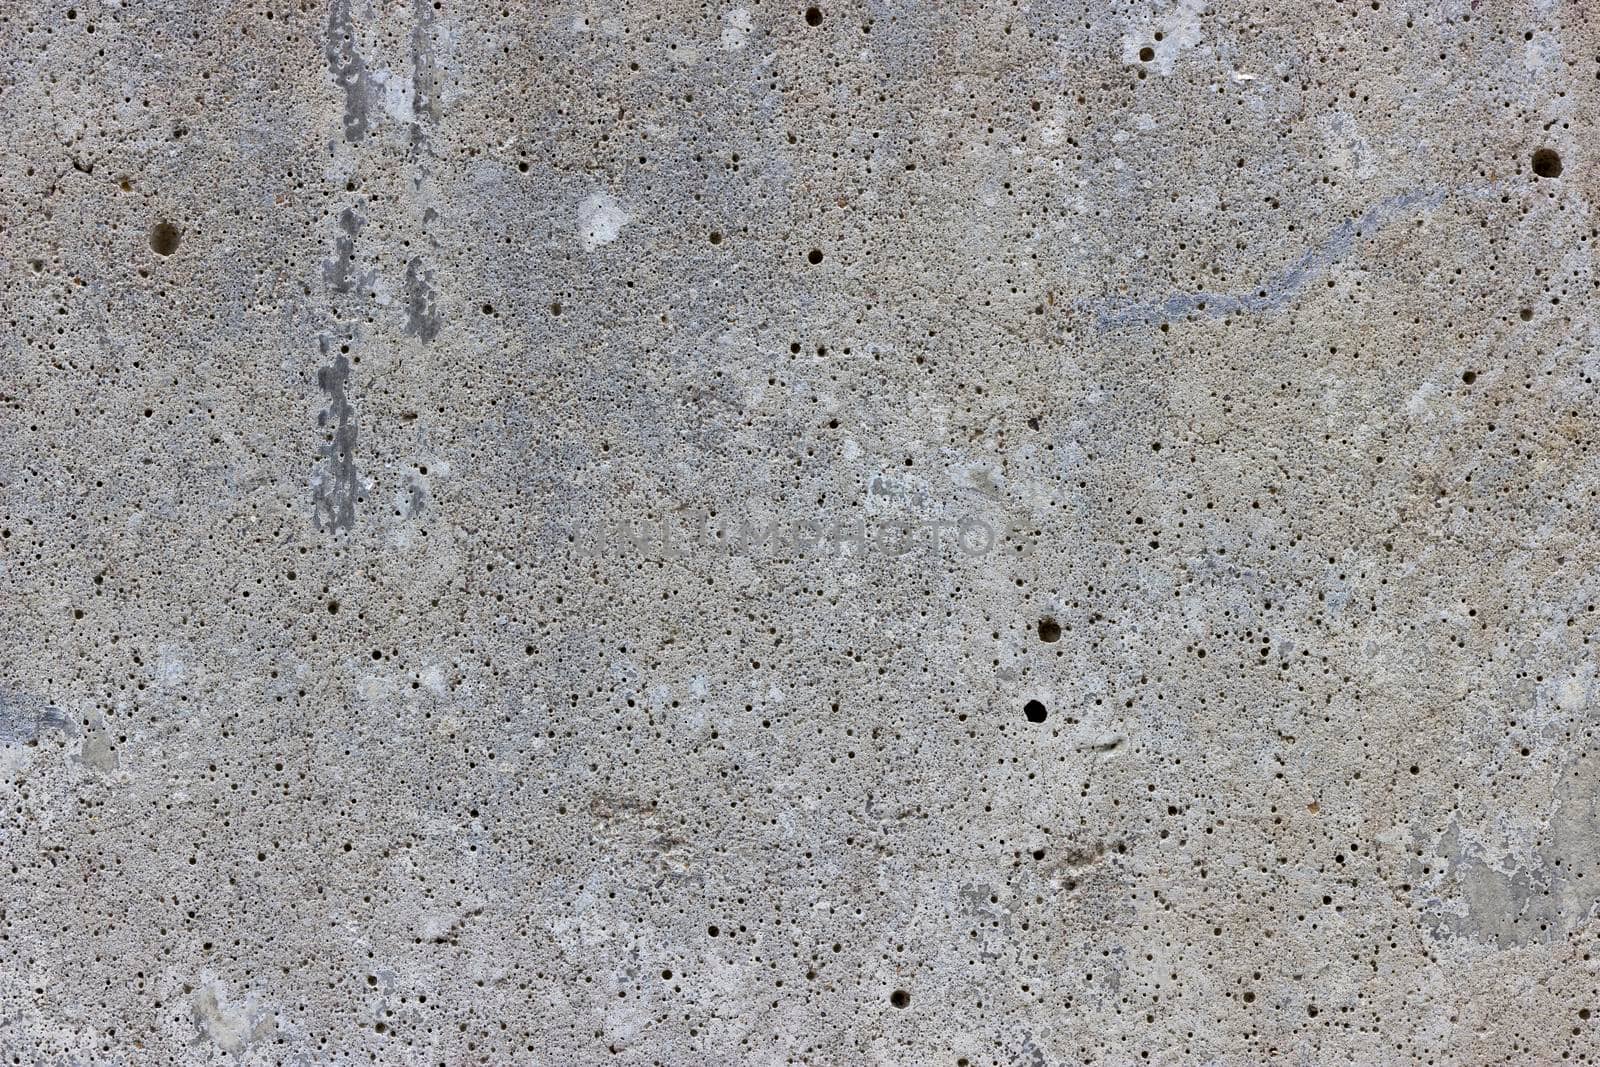 A flat grey concrete surface. The surface is textured and covered in holes from lots of tiny air bubbles.